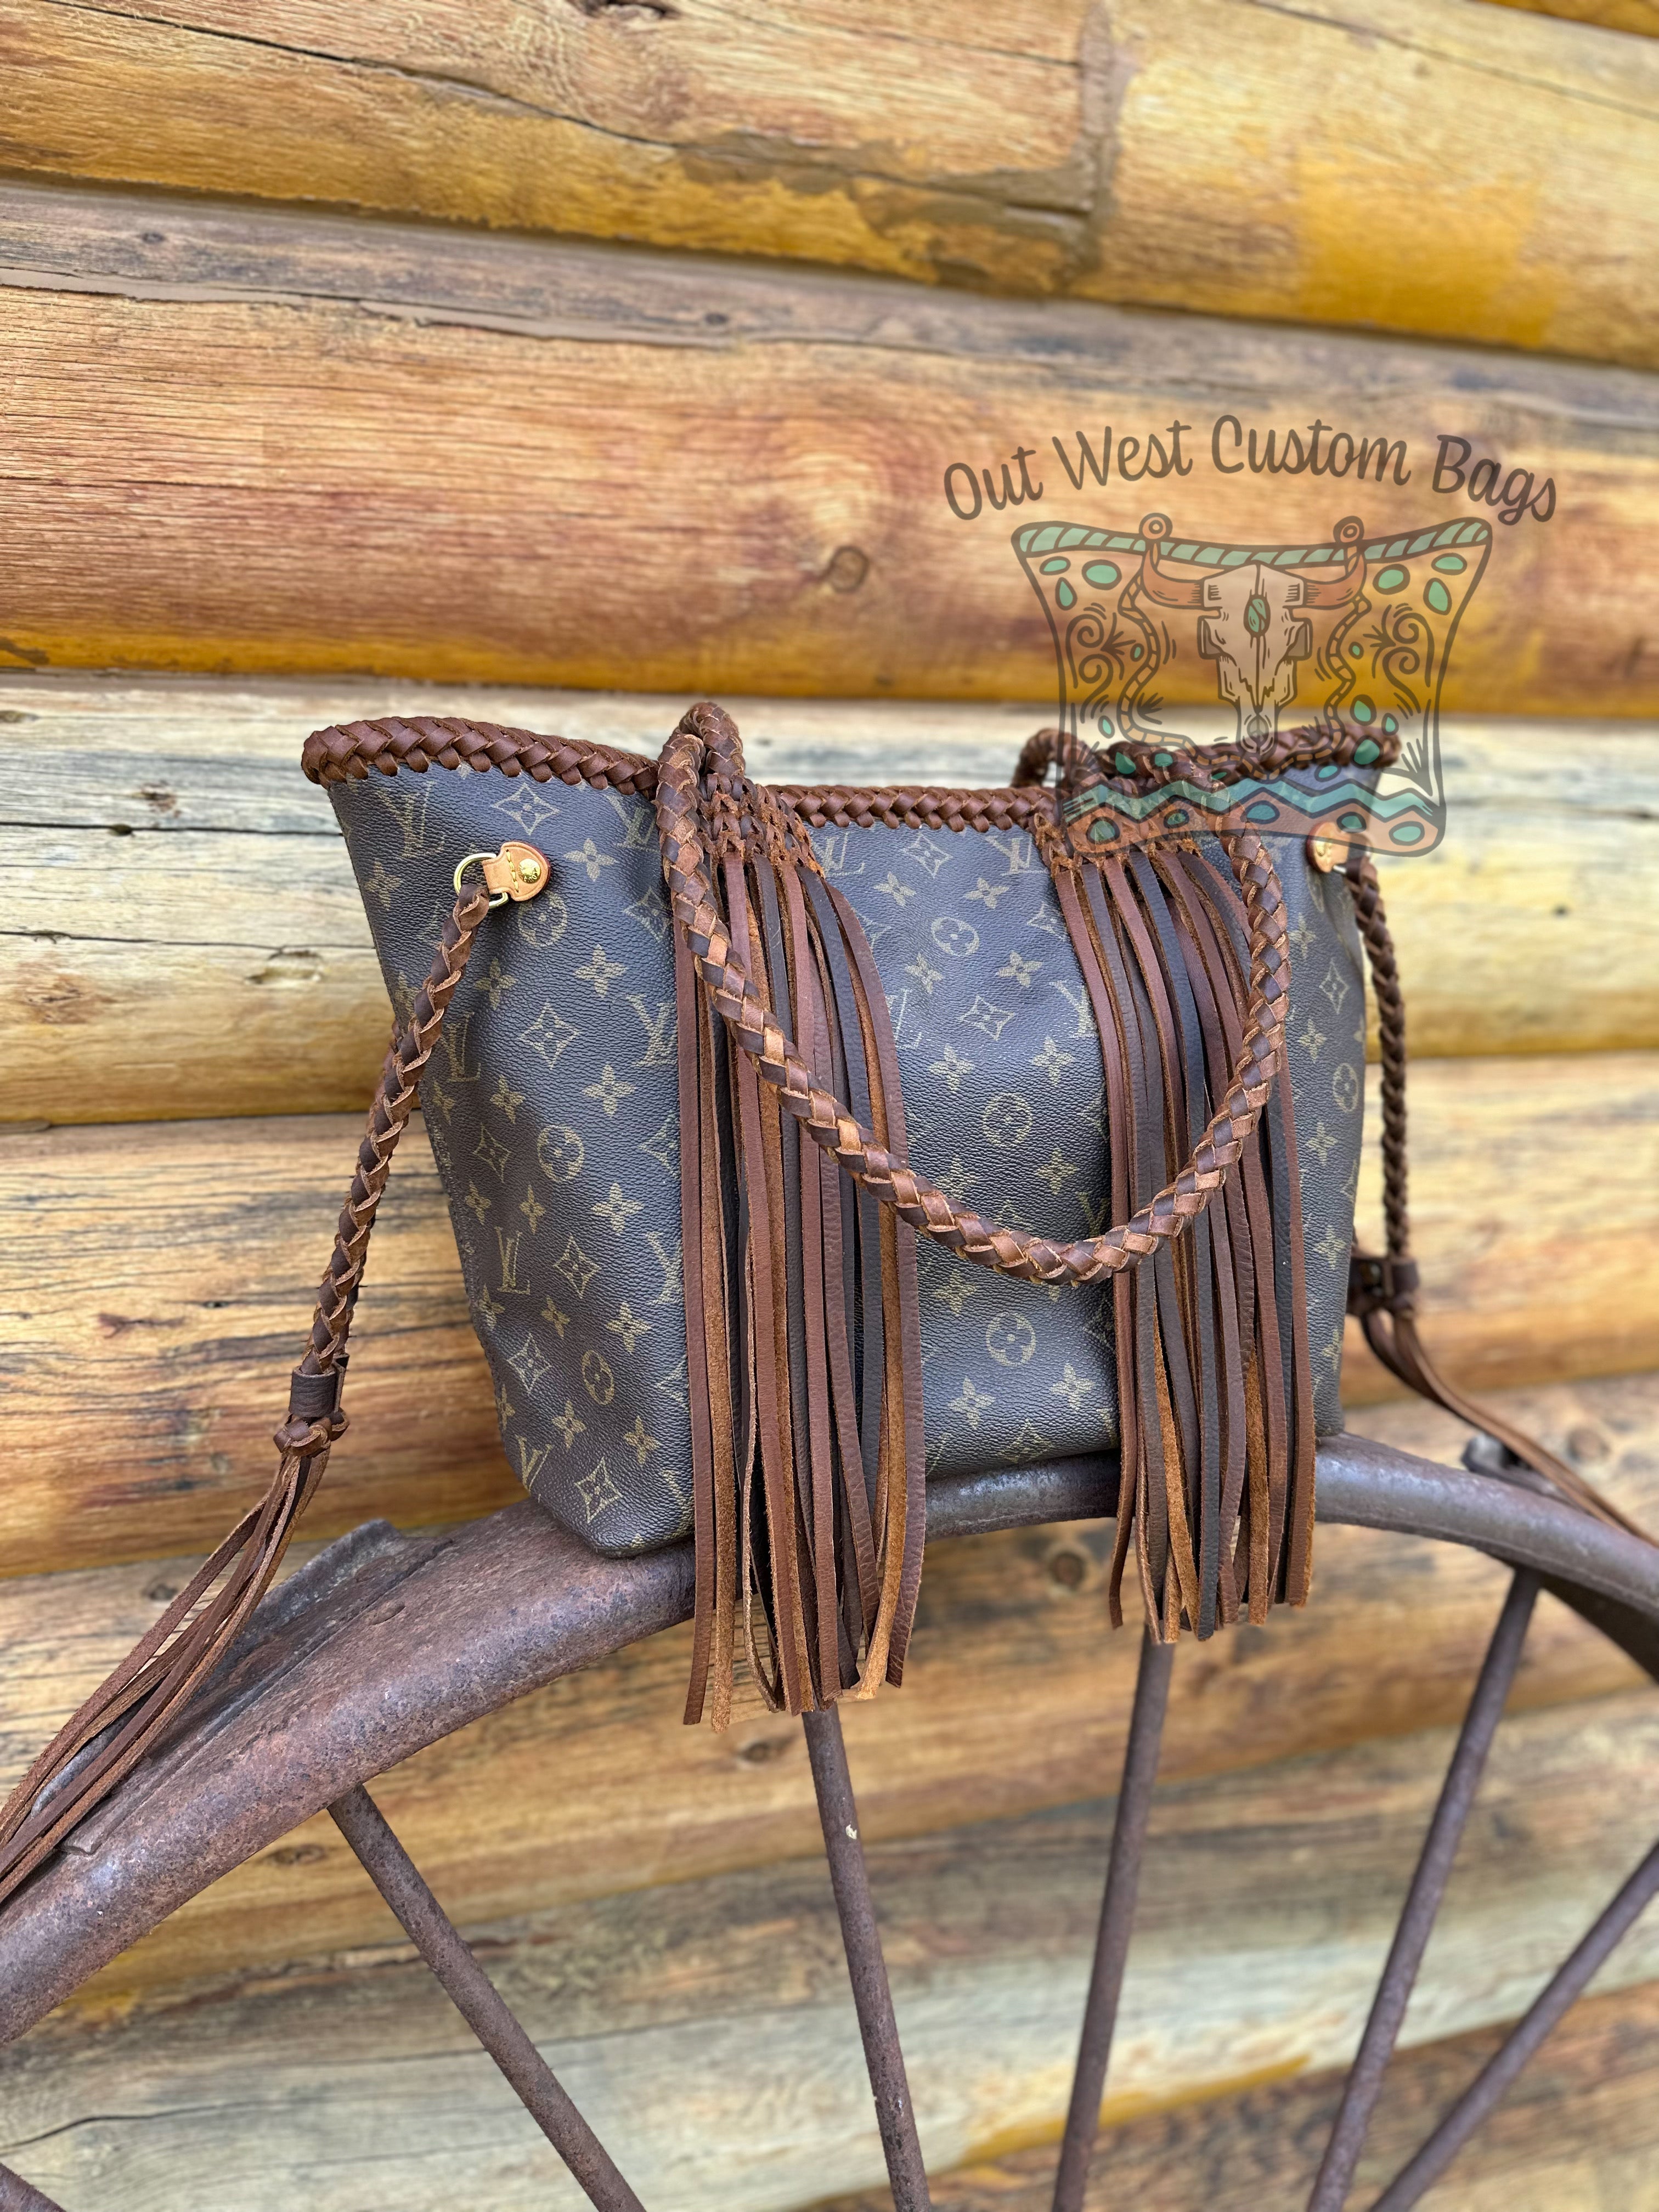 Bring your LV Neverfull back! Add a fun strap! 🤎 #lvneverfull